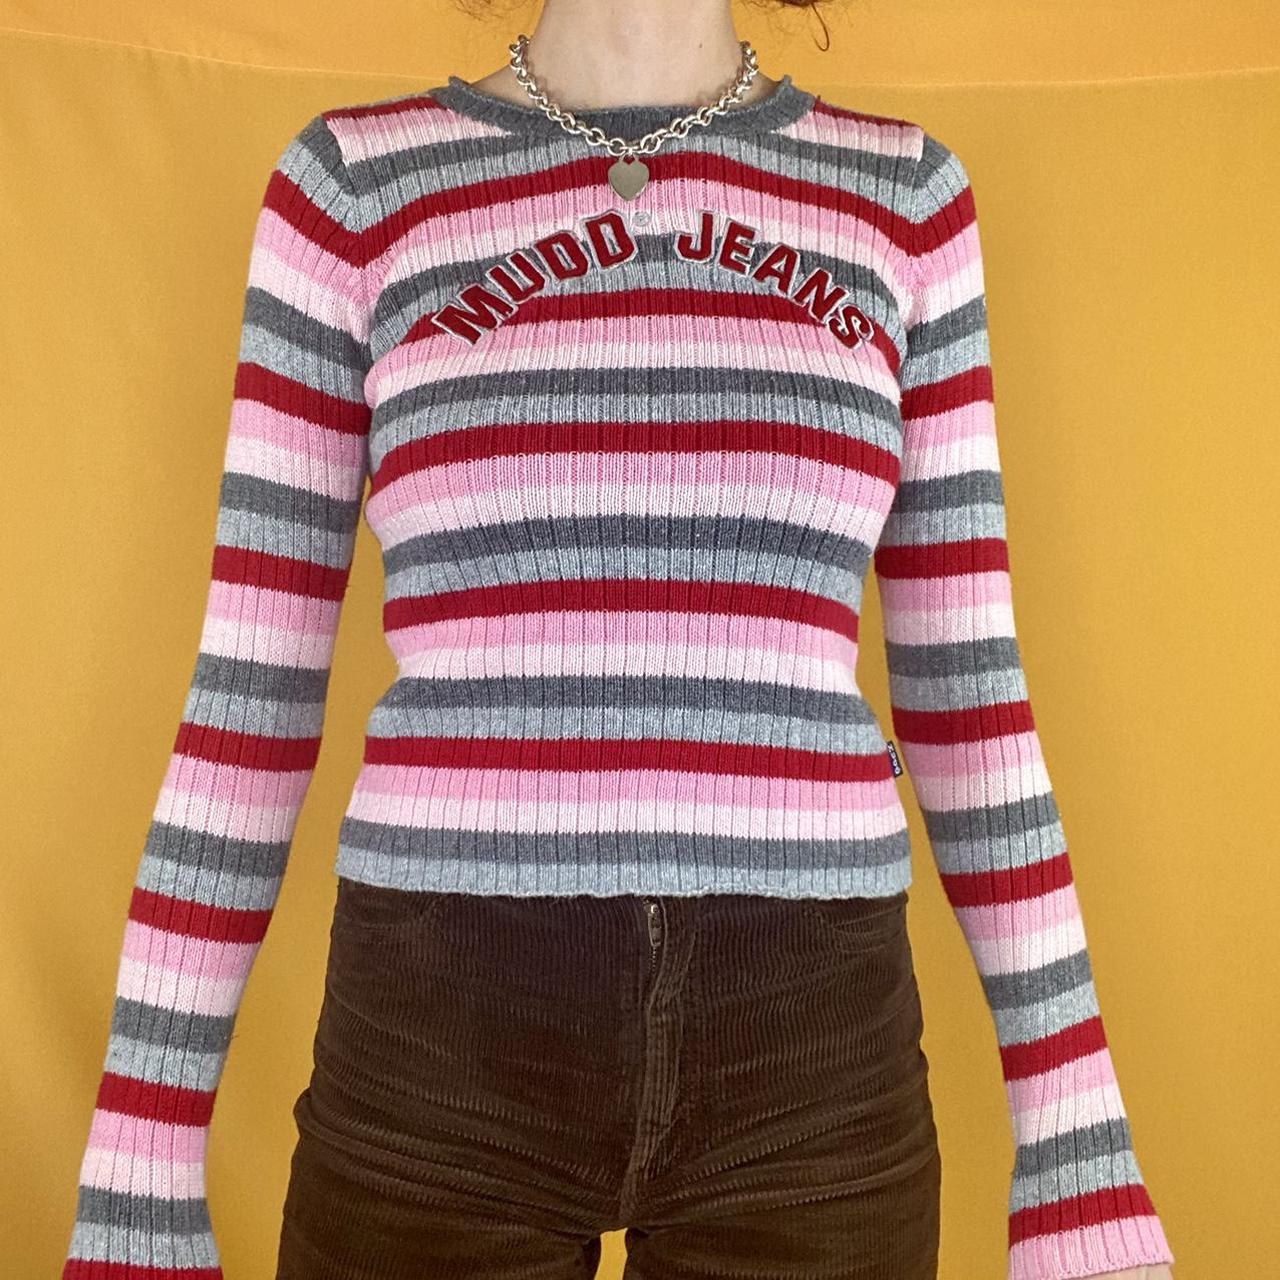 Product Image 3 - VINTAGE MUDD JEANS SWEATER!
multi colored